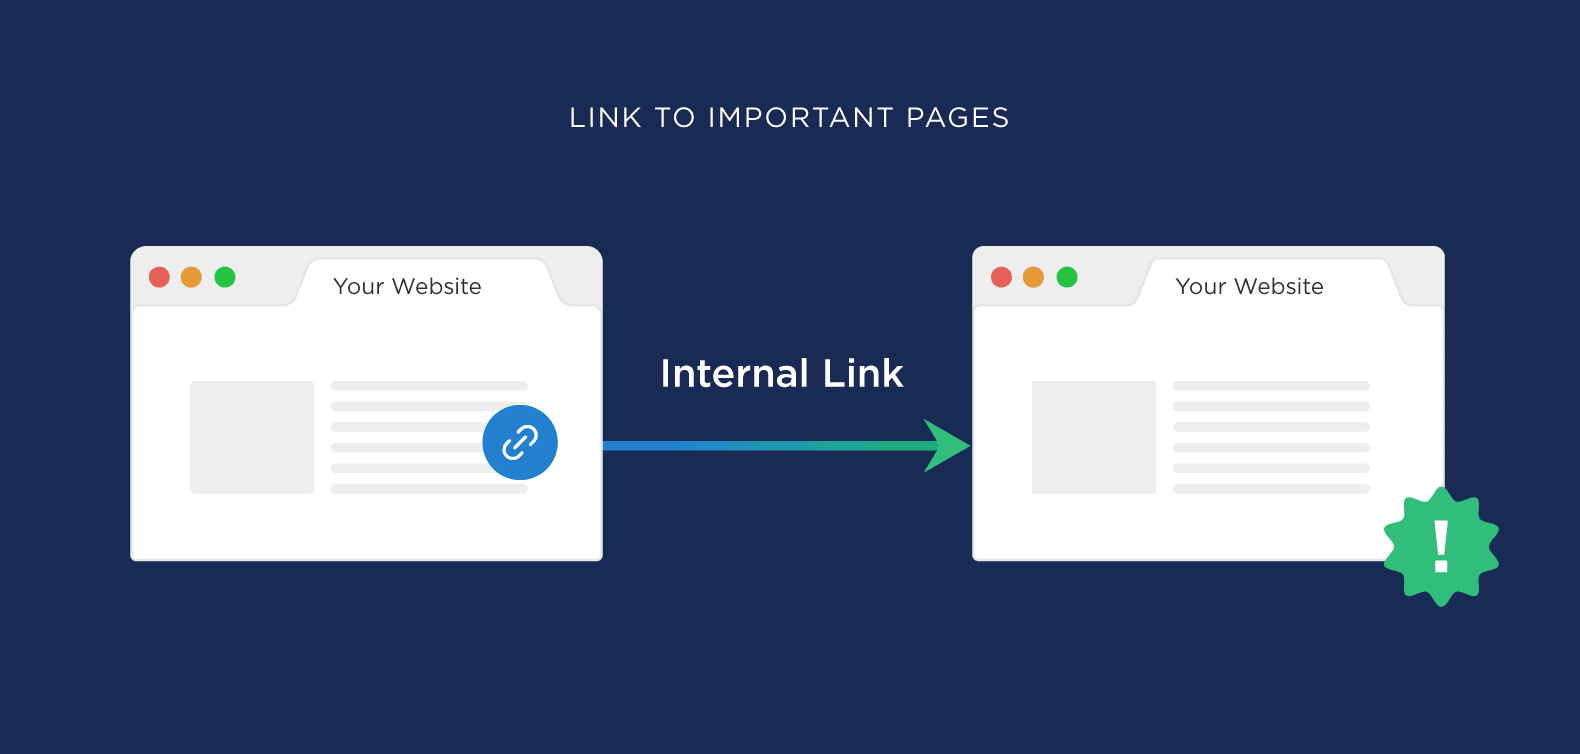 Should you add nofollow to internal links?